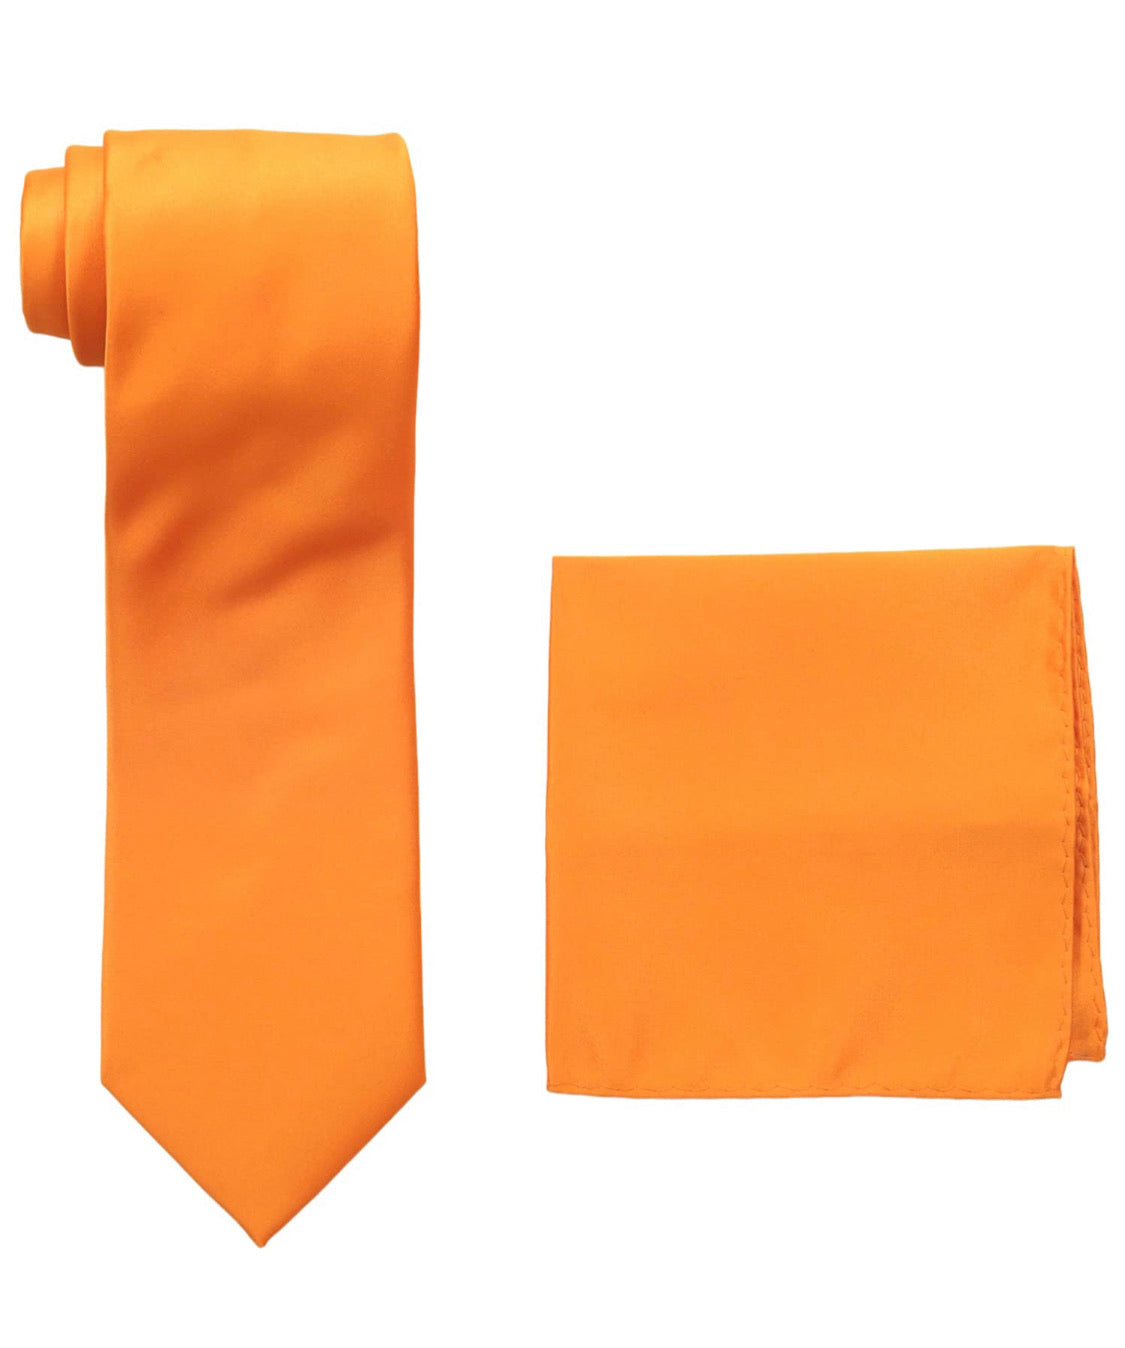 Stacy Adams Solid Orange Tie and Hanky - On Time Fashions Tuscaloosa